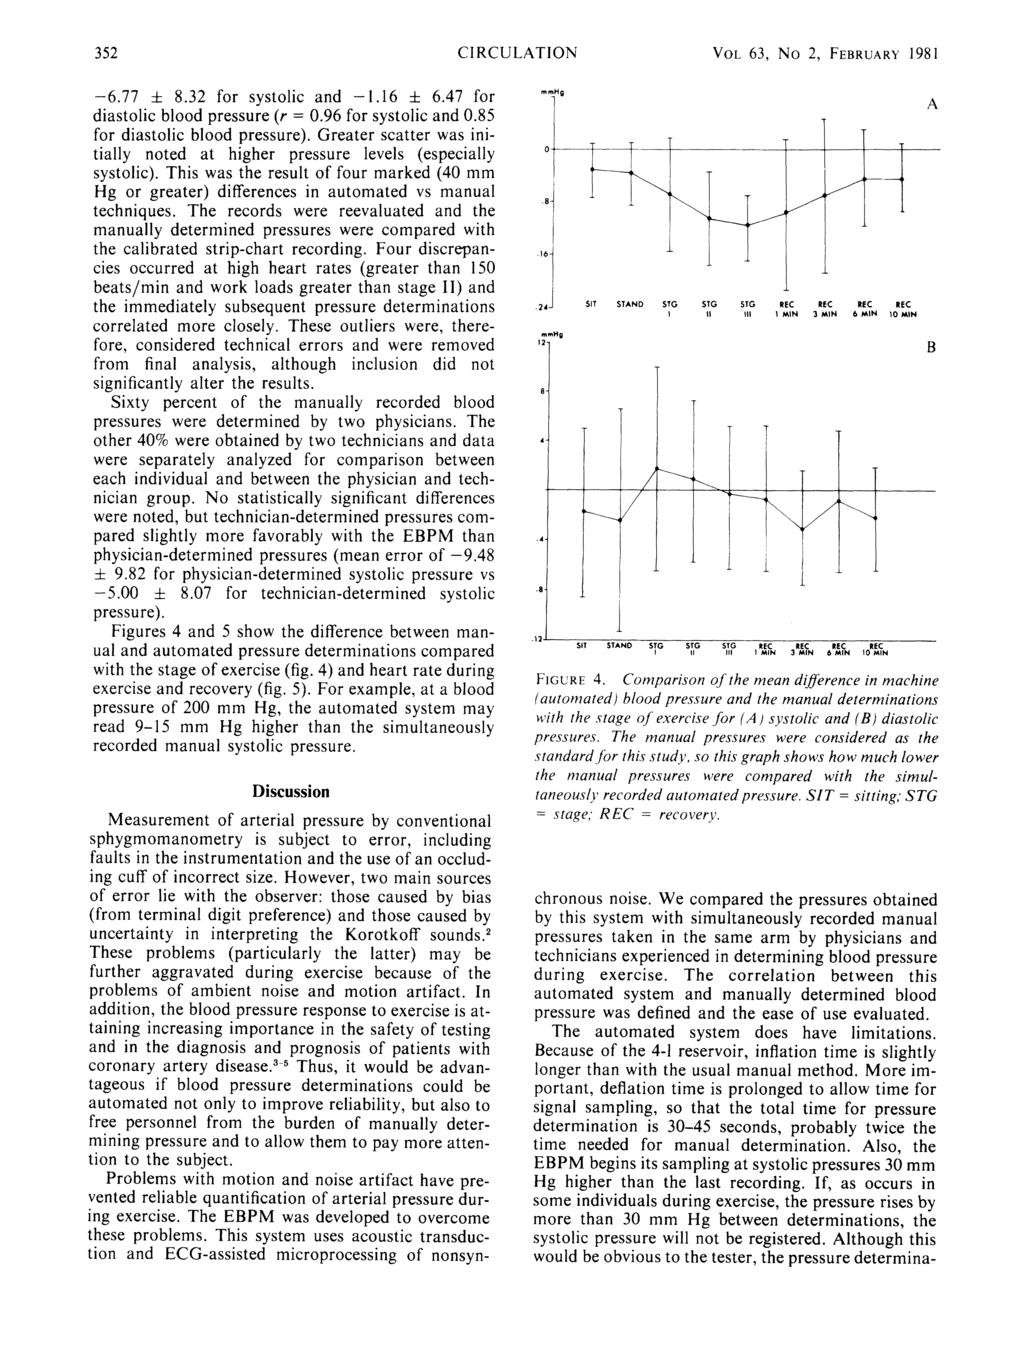 352 CI RCULAION VOL 63, No 2, FEBRUARY 1981-6.77 ± 8.32 for systolic and -1.16 ± 6.47 for diastolic blood pressure (r = 0.96 for systolic and 0.85 for diastolic blood pressure).